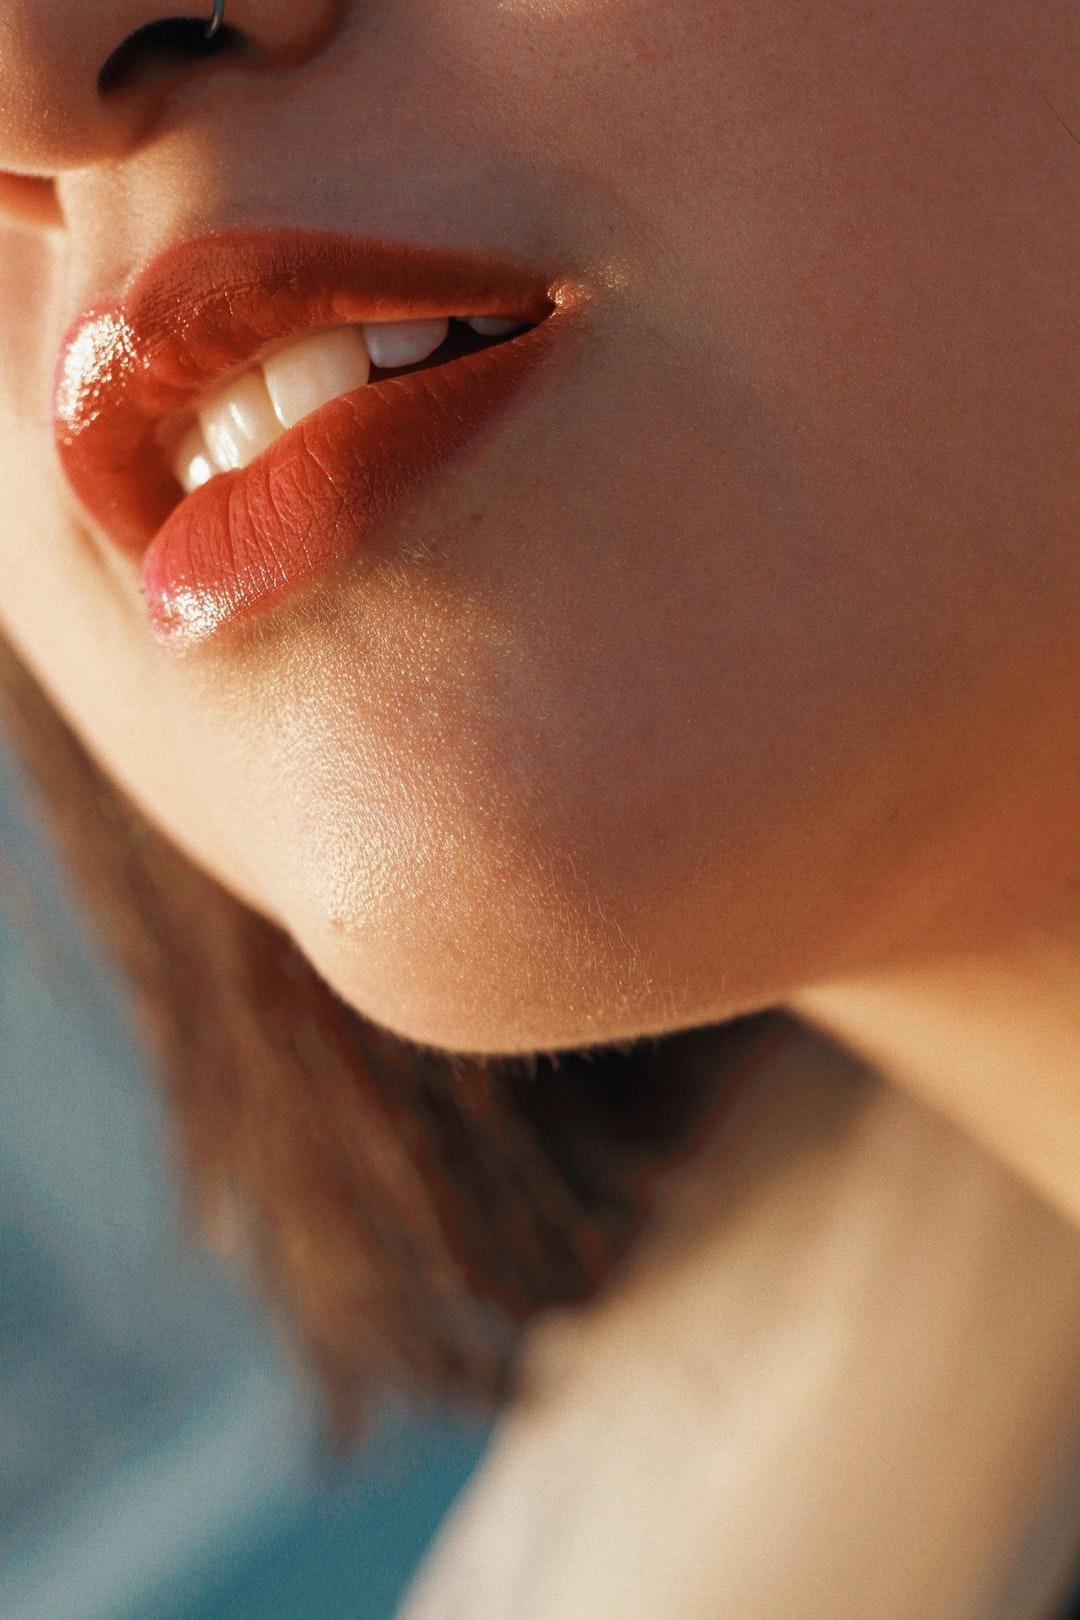 Lip Picture. Download Free Image